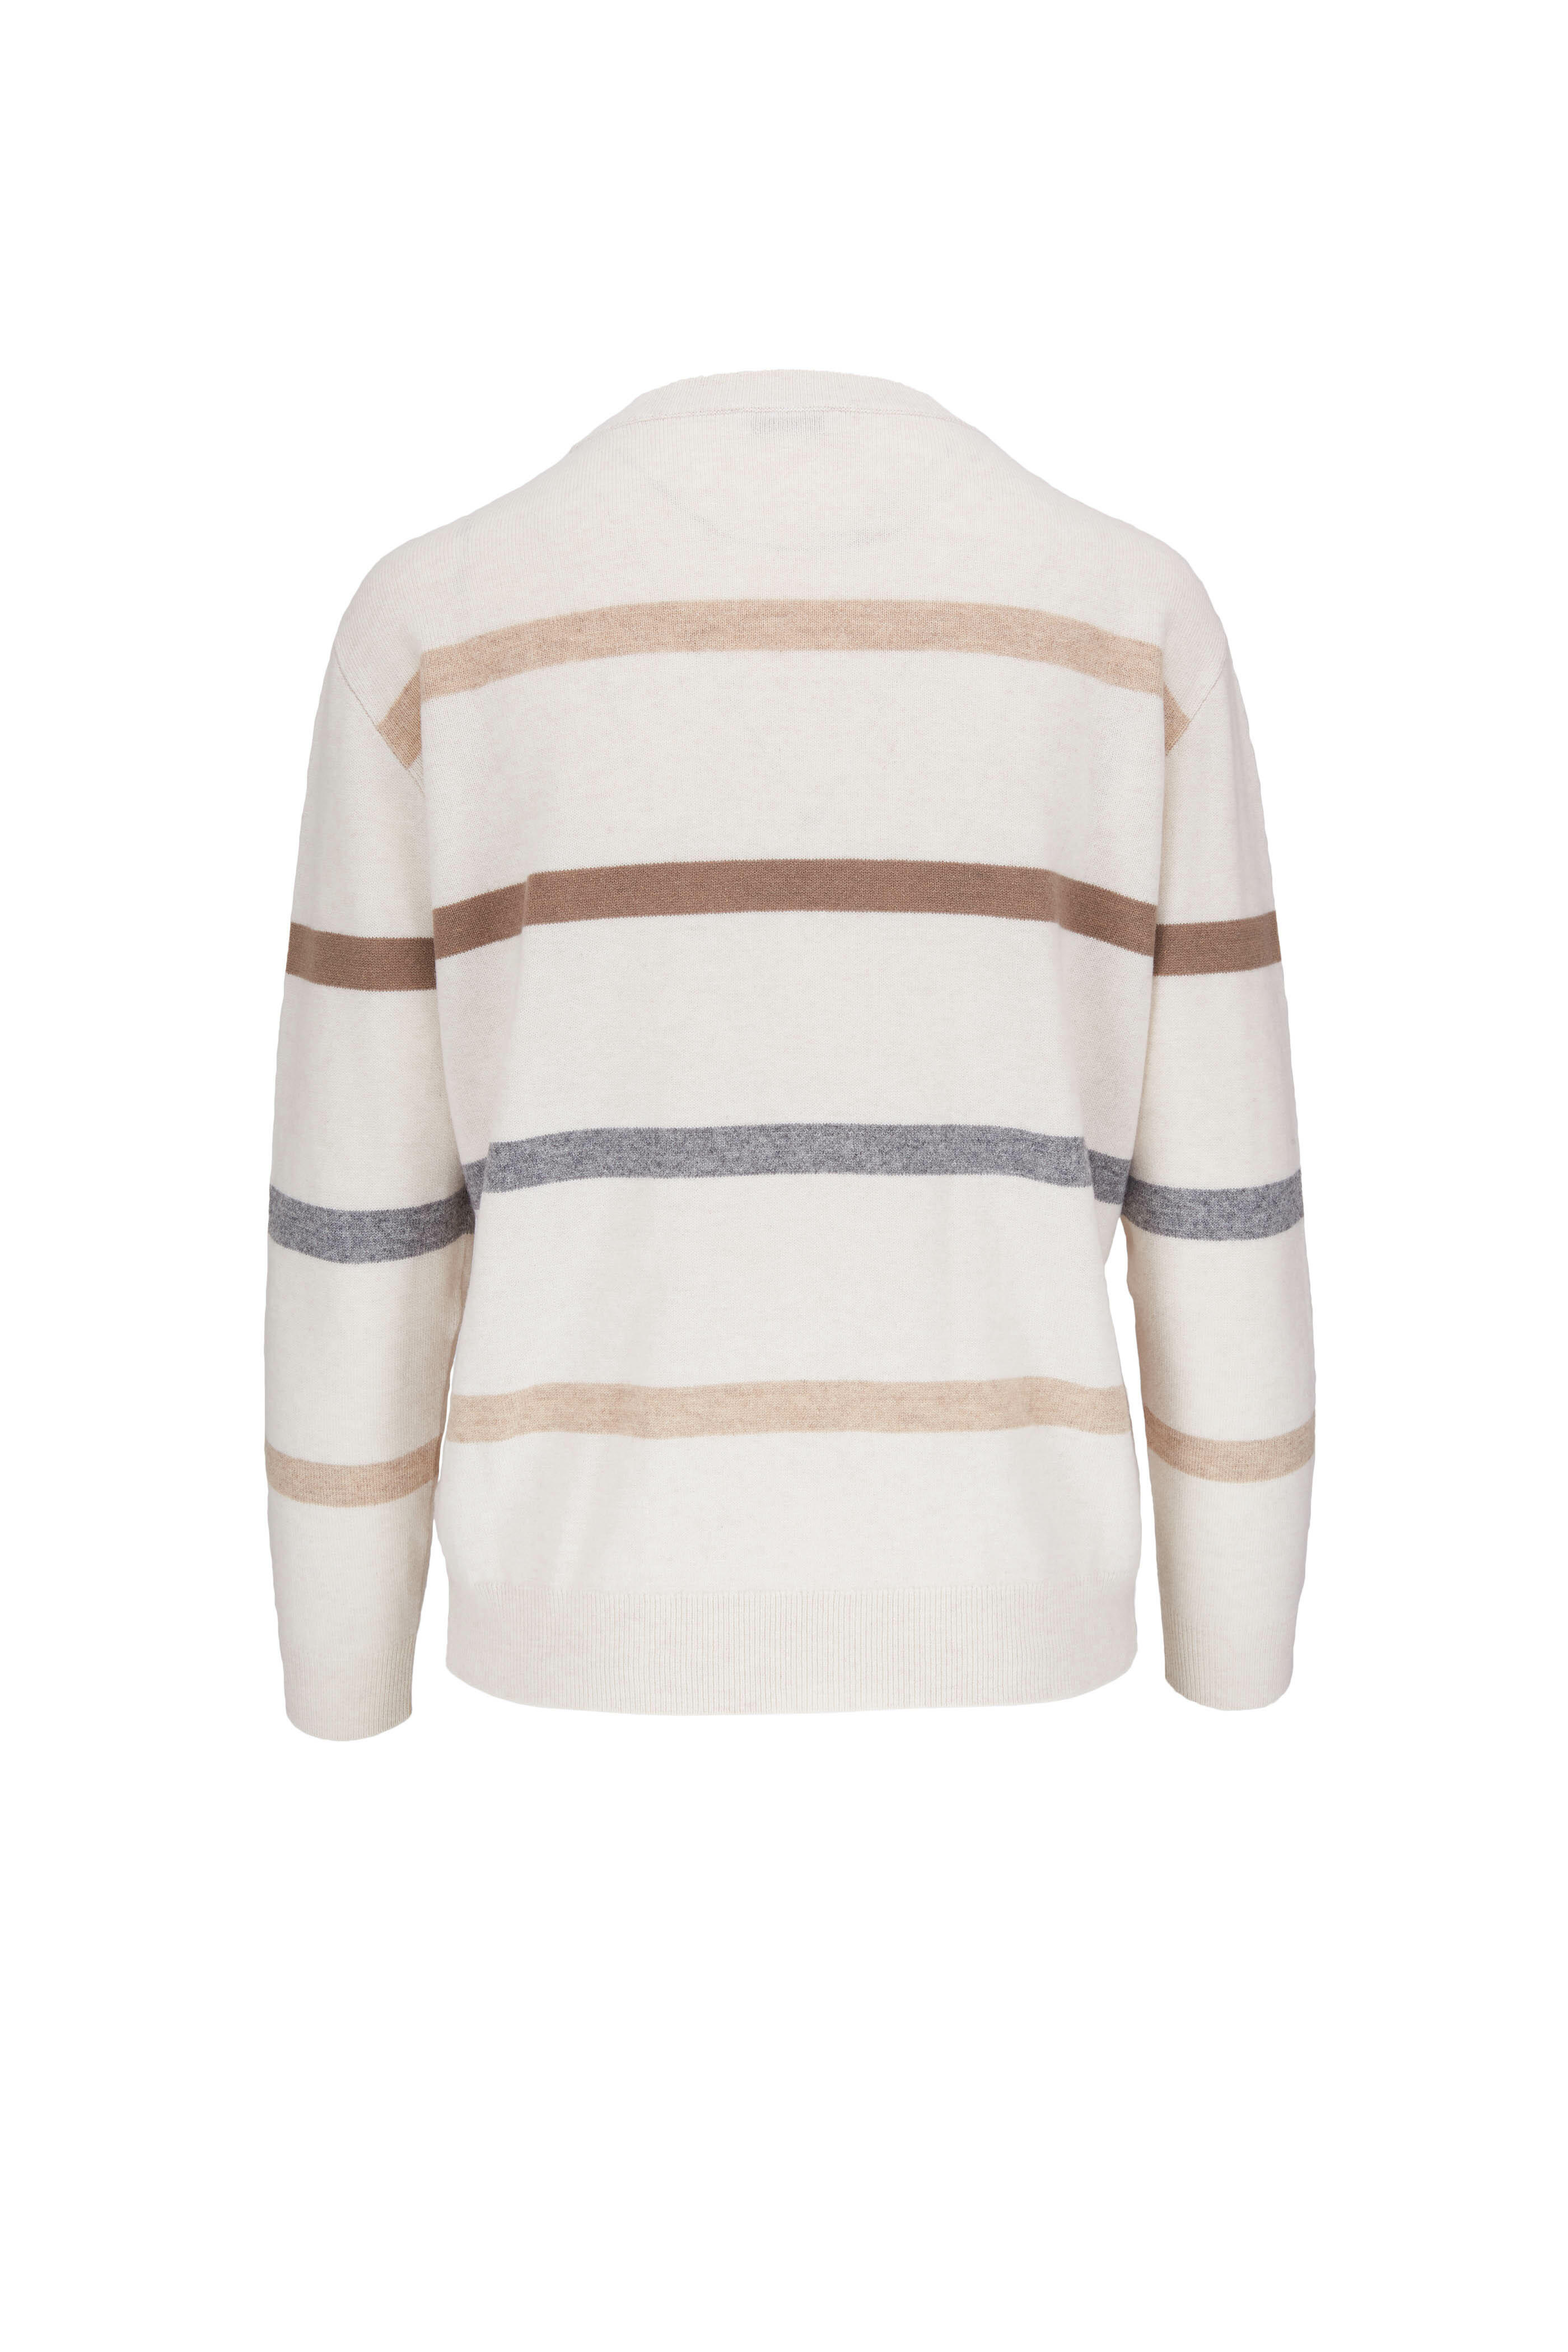 Sequin Stripe Funnel Neck Jumper with Cashmere, Clothing Sale